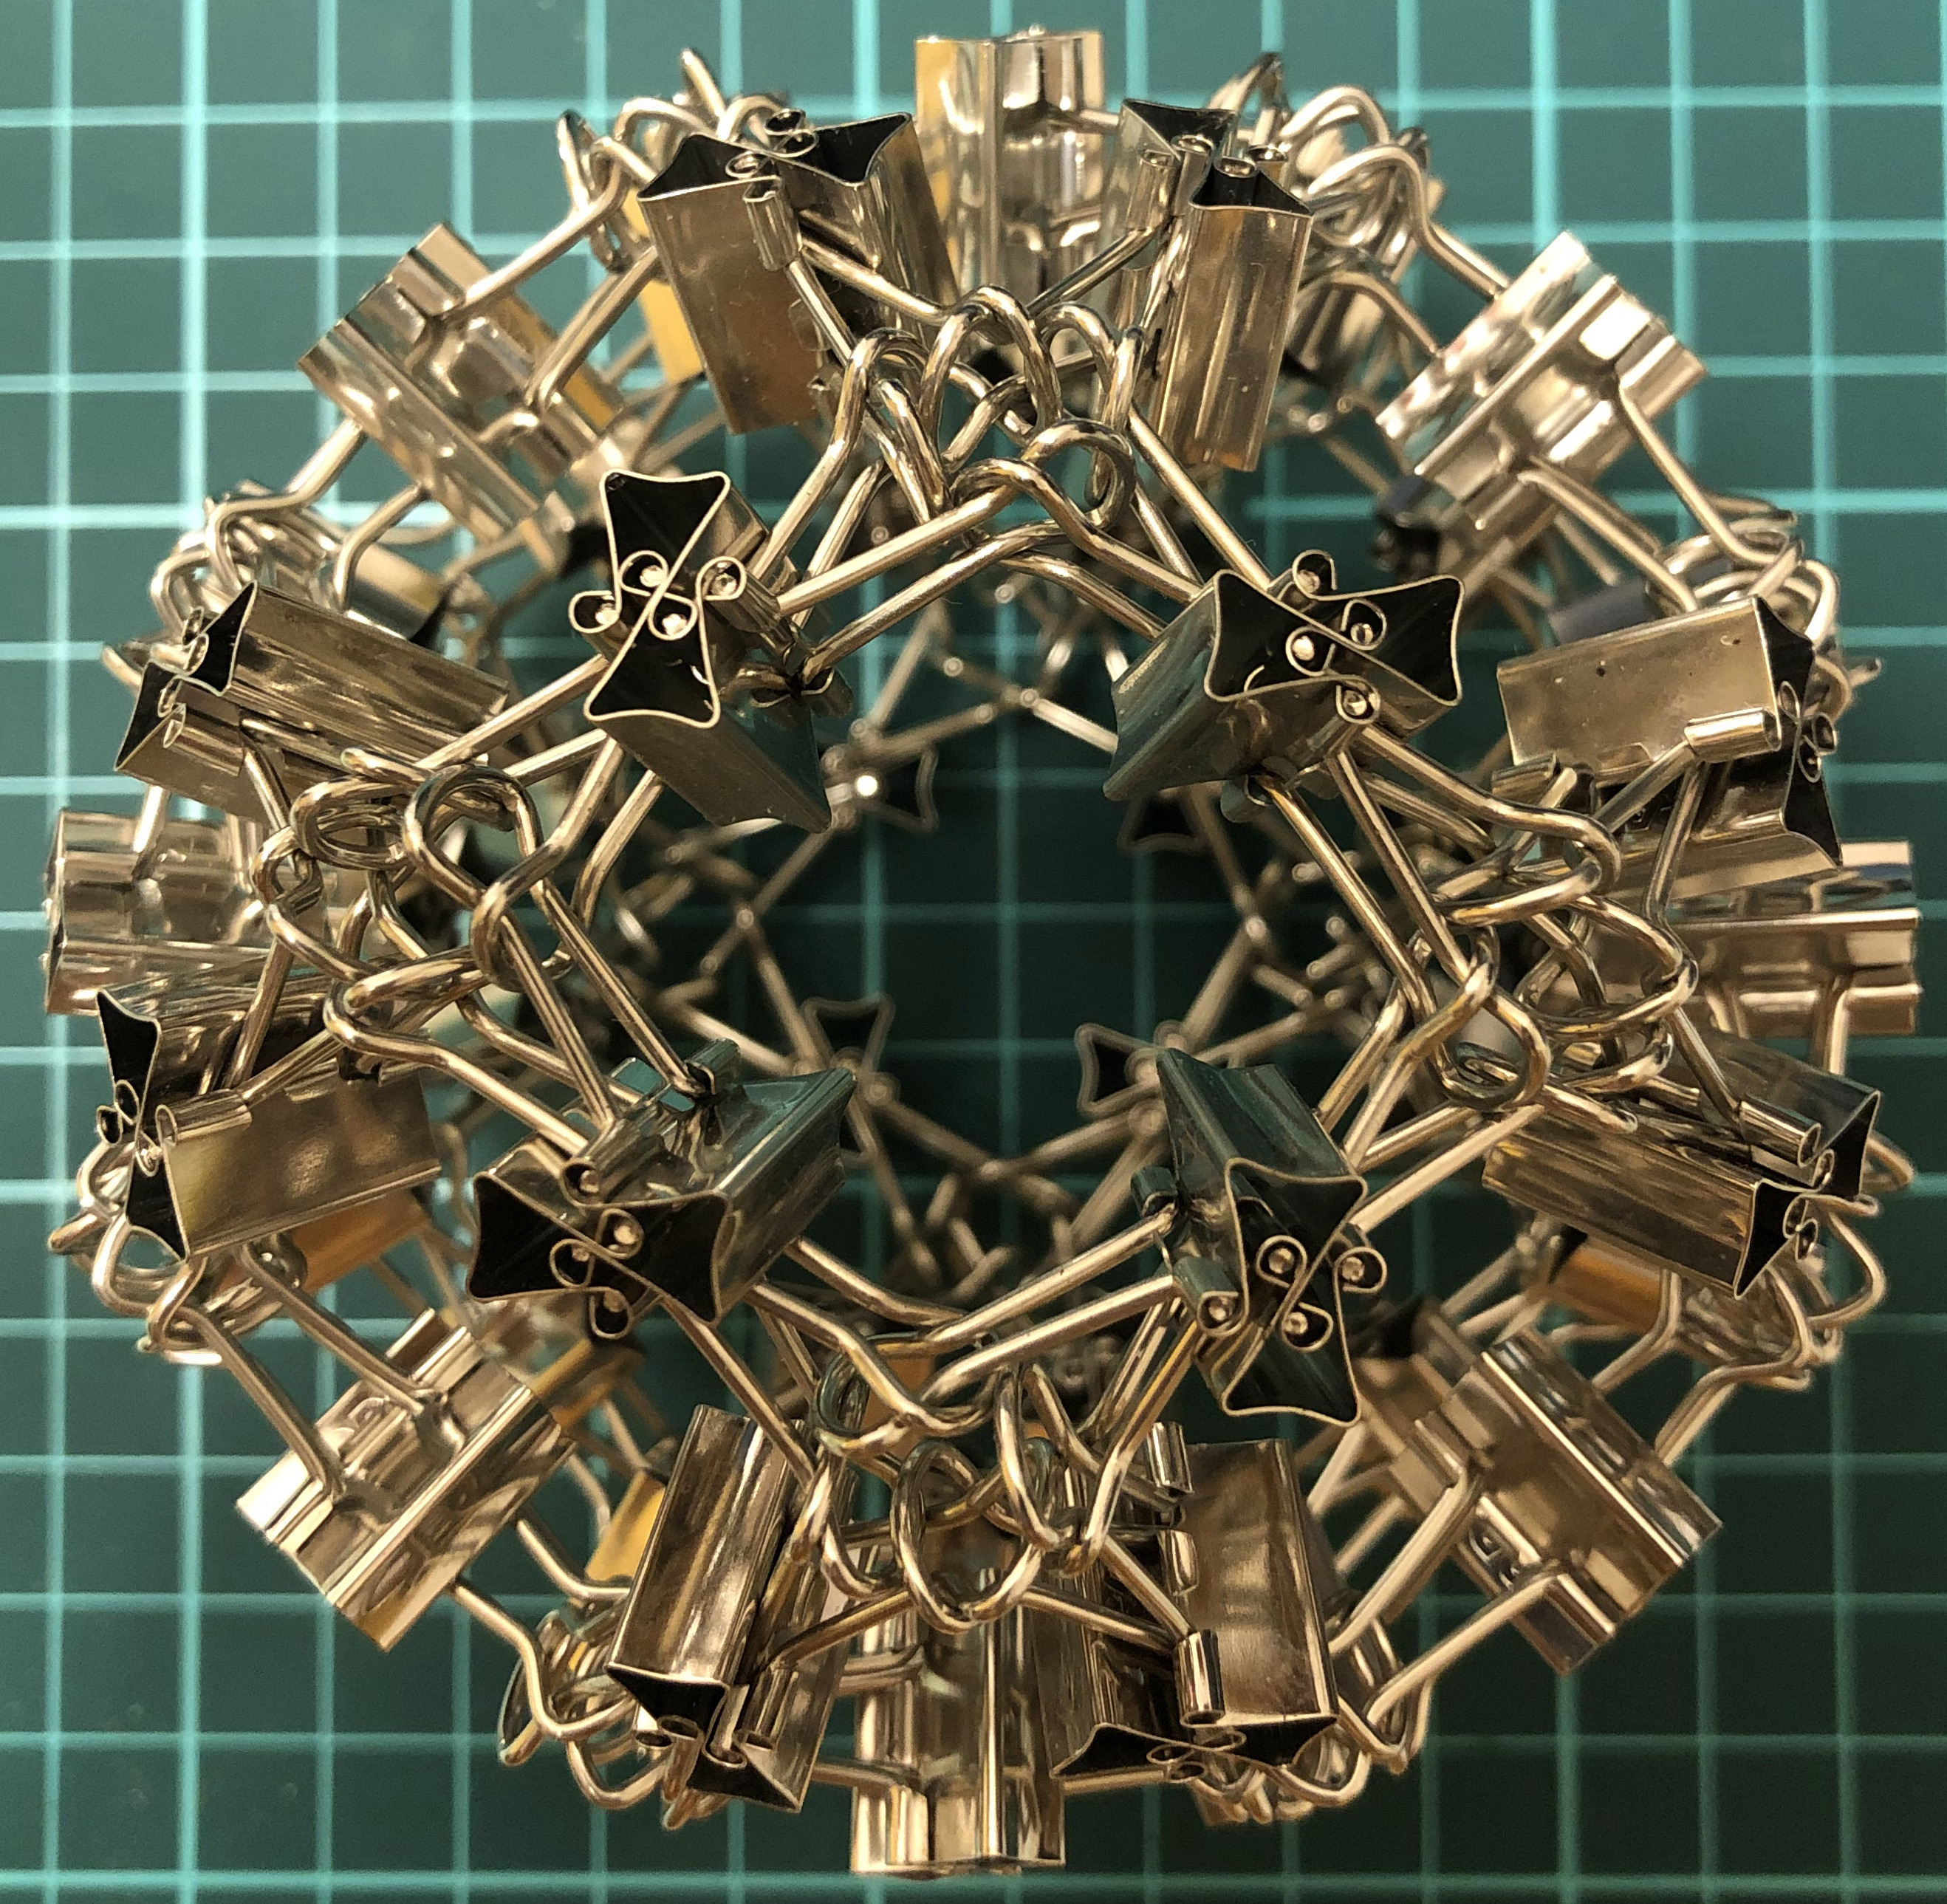 96 clips forming 96 I-edges forming rhombicuboctahedron